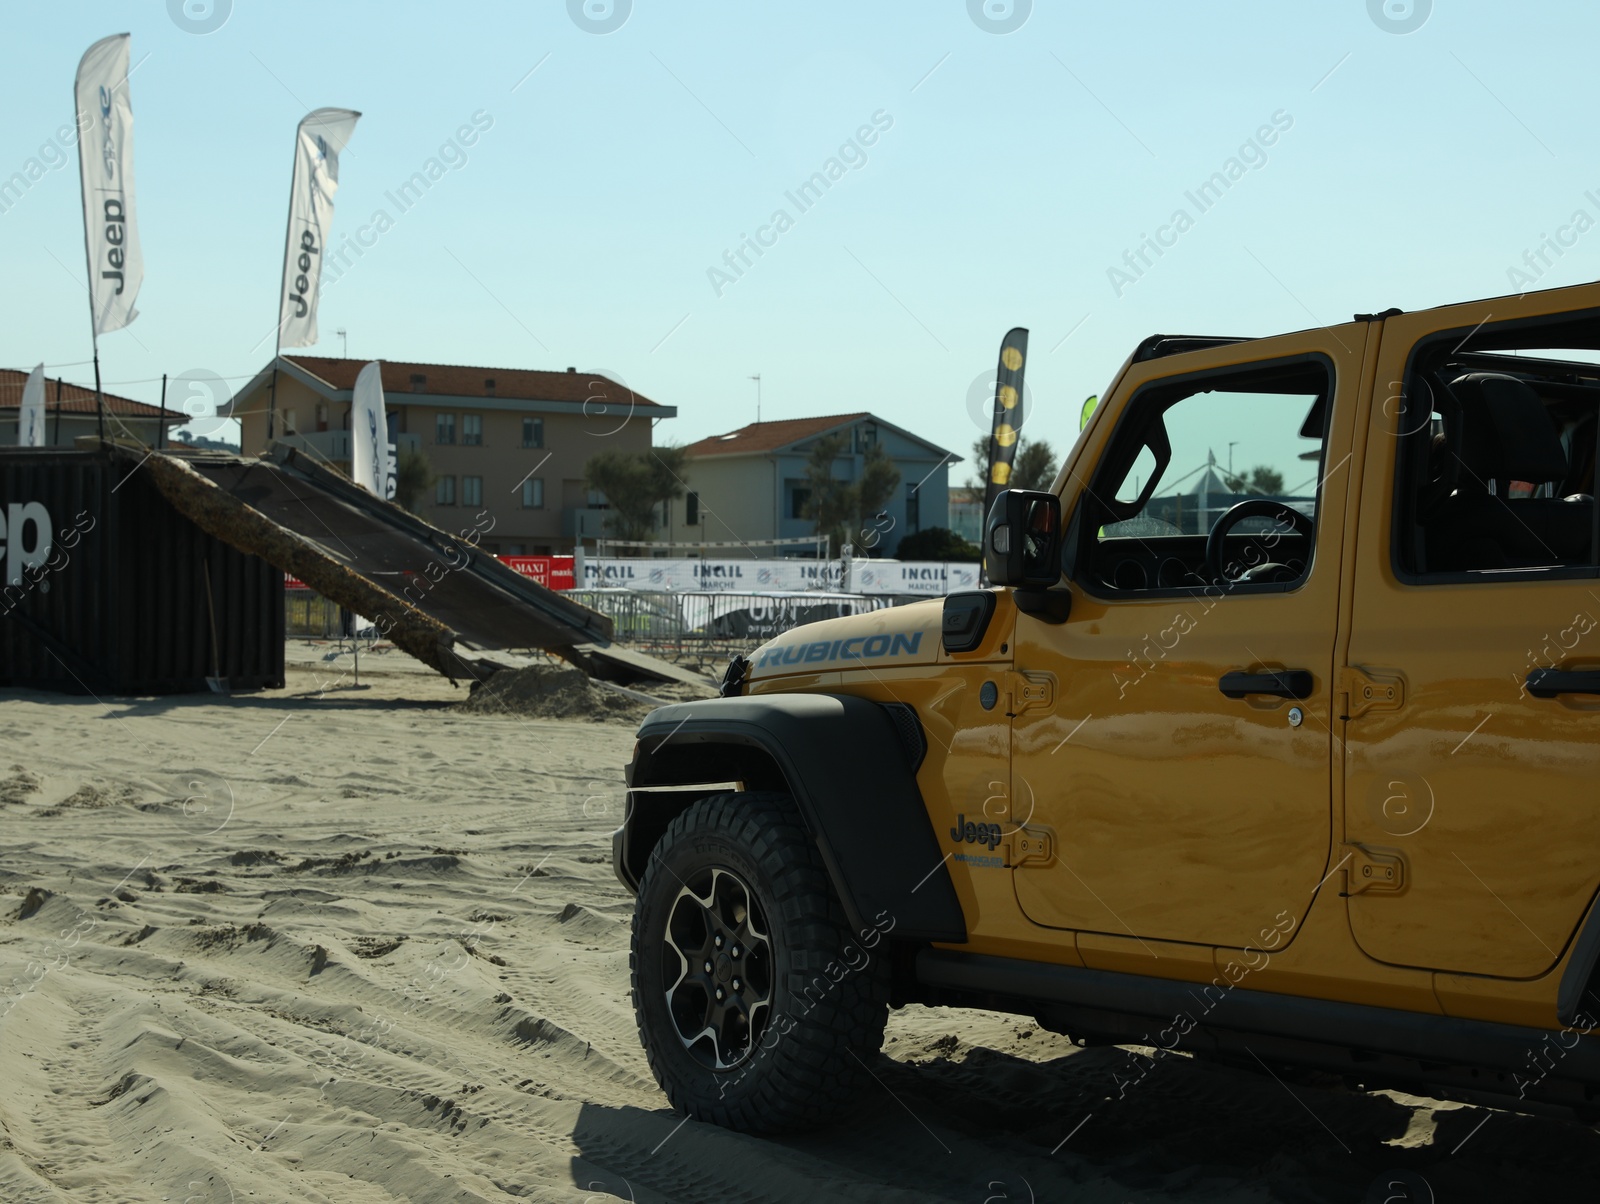 Photo of SENIGALLIA, ITALY - JULY 22, 2022: Jeep test drive on sand outdoors. Car presentation